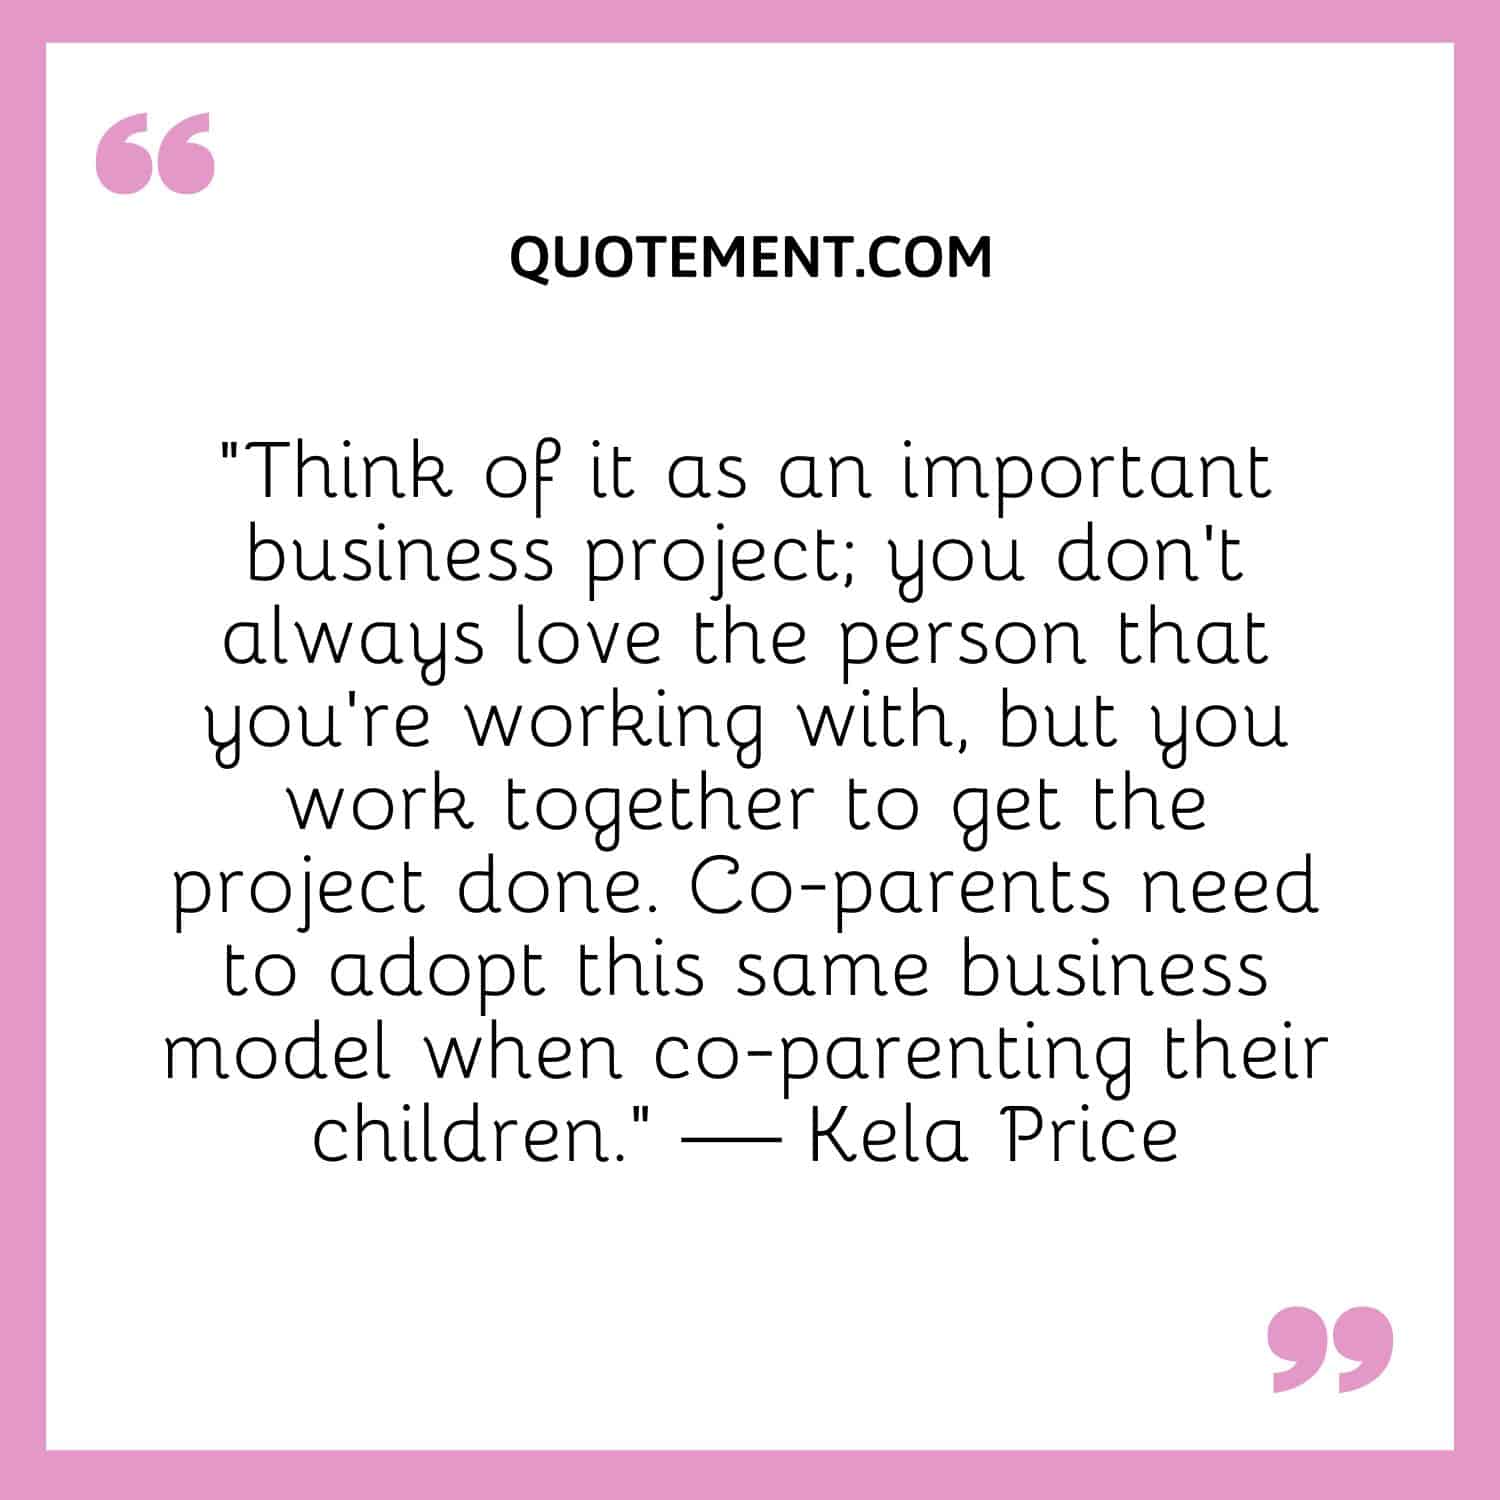 Co-parents need to adopt this same business model when co-parenting their children